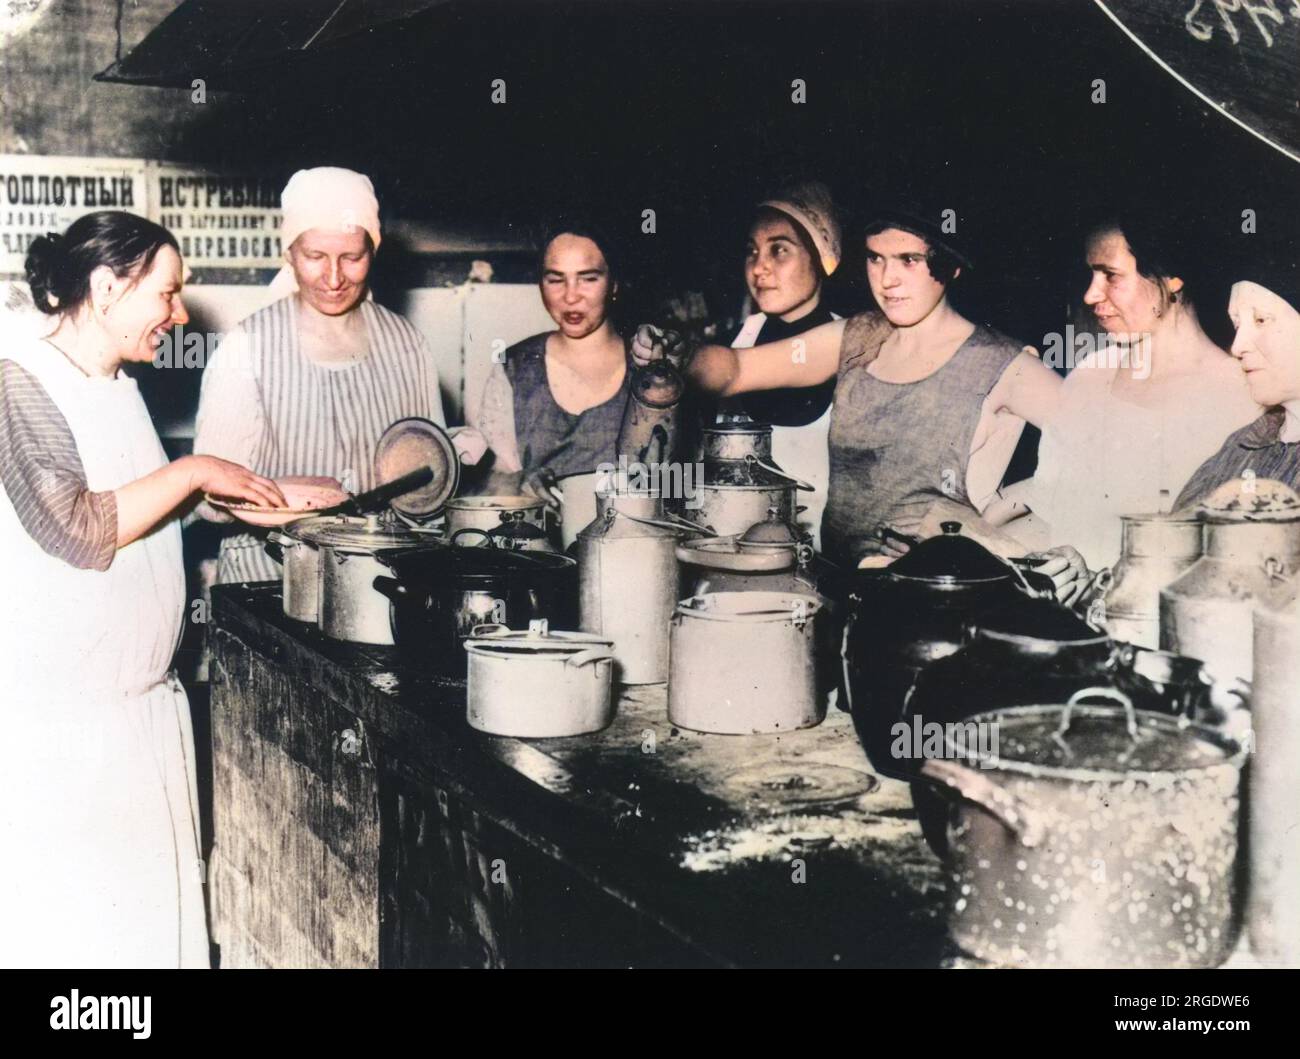 https://c8.alamy.com/comp/2RGDWE6/seven-women-busying-themselves-around-a-stone-work-top-adorned-with-an-array-of-large-tins-and-pots-in-a-1920s-russian-communal-kitchen-2RGDWE6.jpg